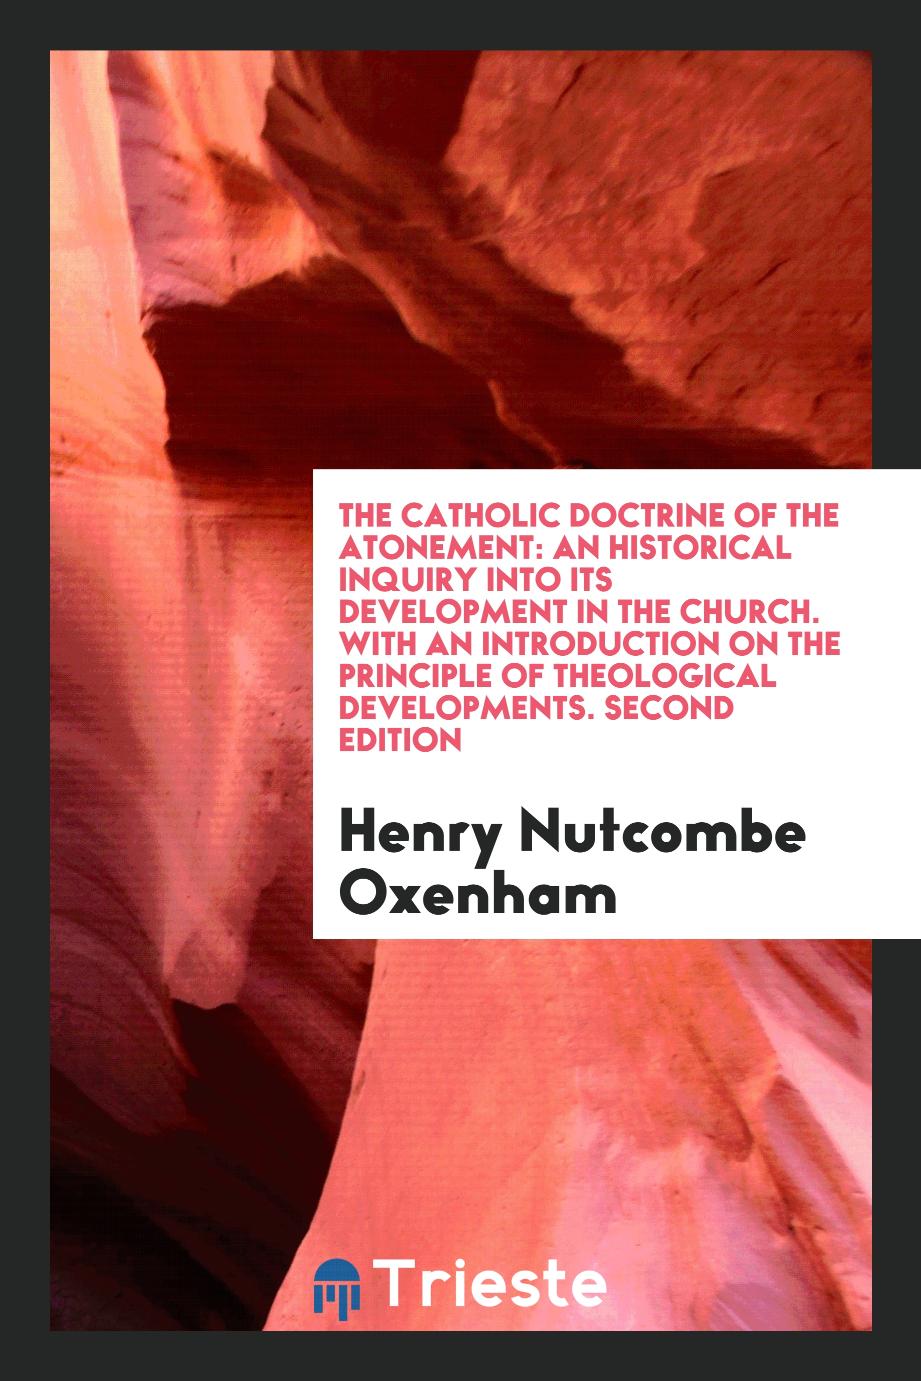 The Catholic Doctrine of the Atonement: An Historical Inquiry into Its Development in the Church. With an Introduction on the Principle of Theological Developments. Second Edition